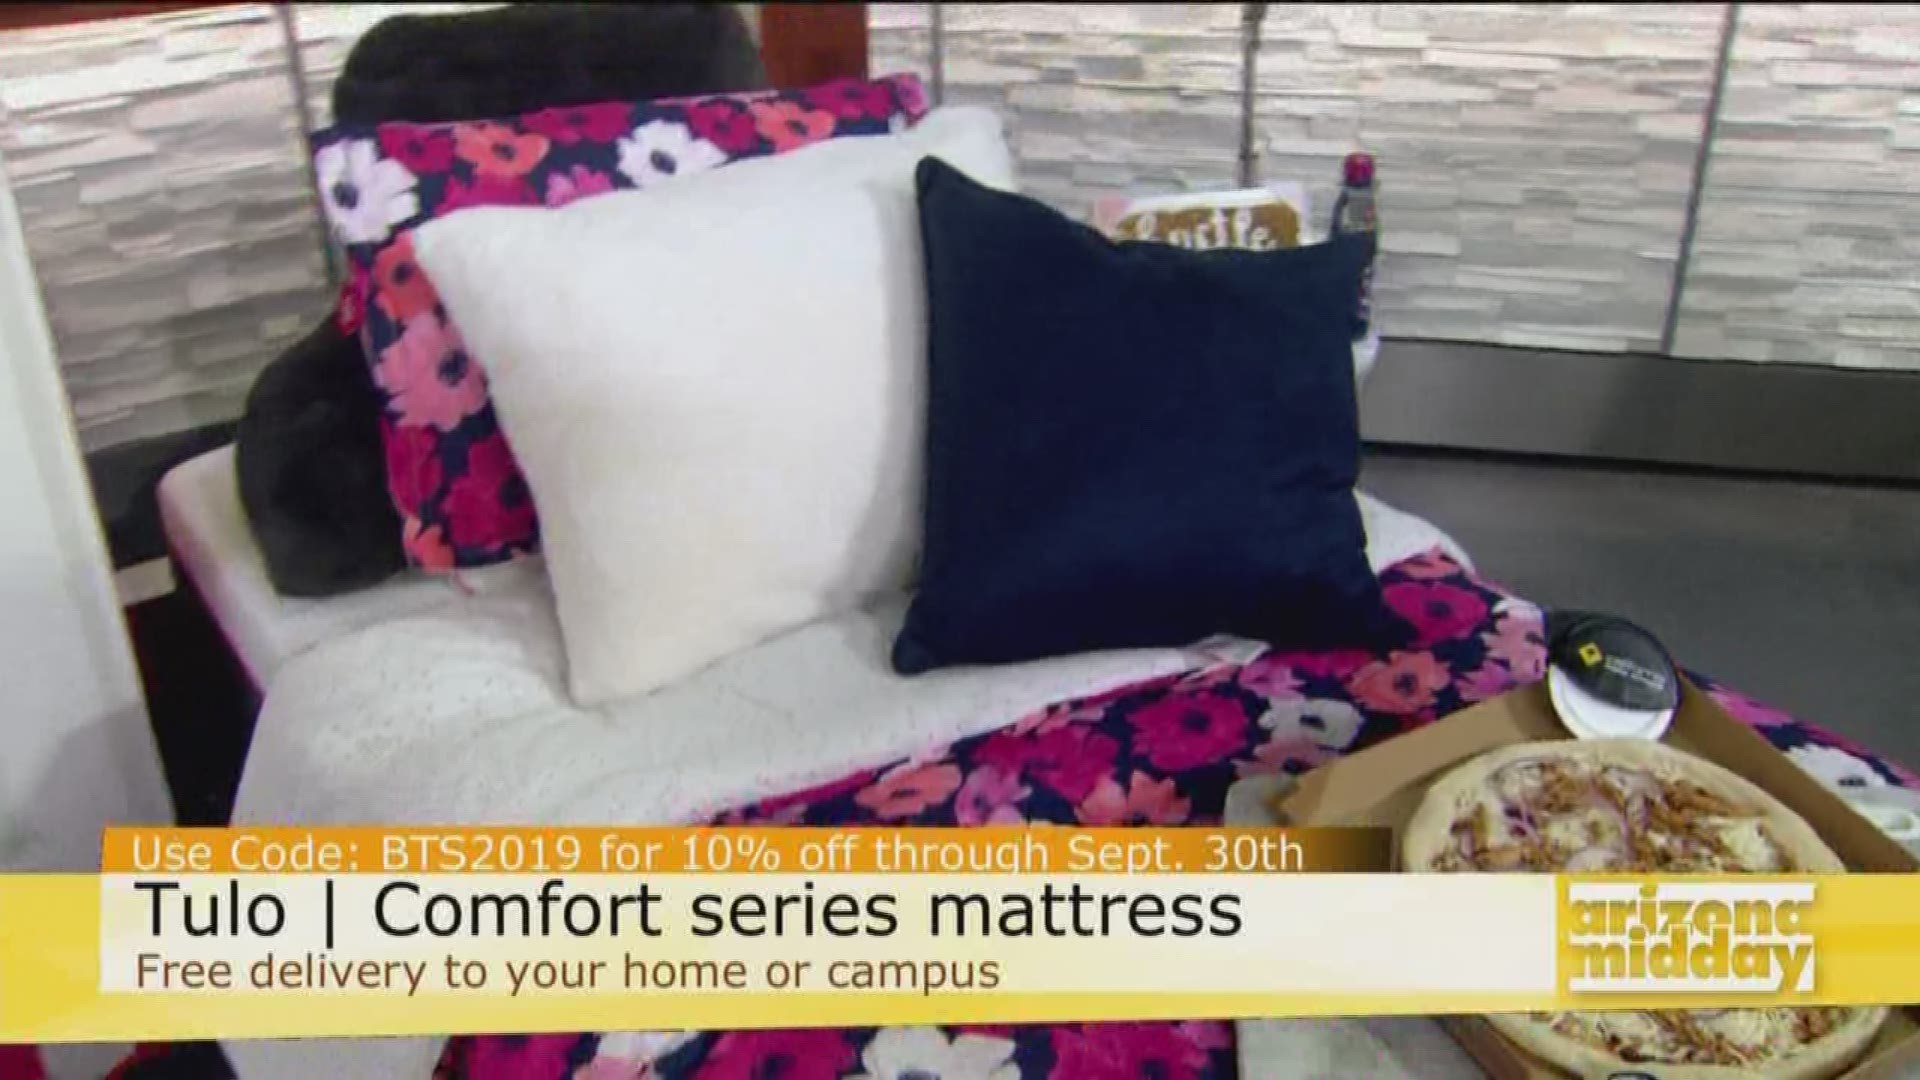 Lifestyle Expert Alison Deyette shows us everything to make your student feel right at home in their dorm from mattress to decor and even some delicious eats!